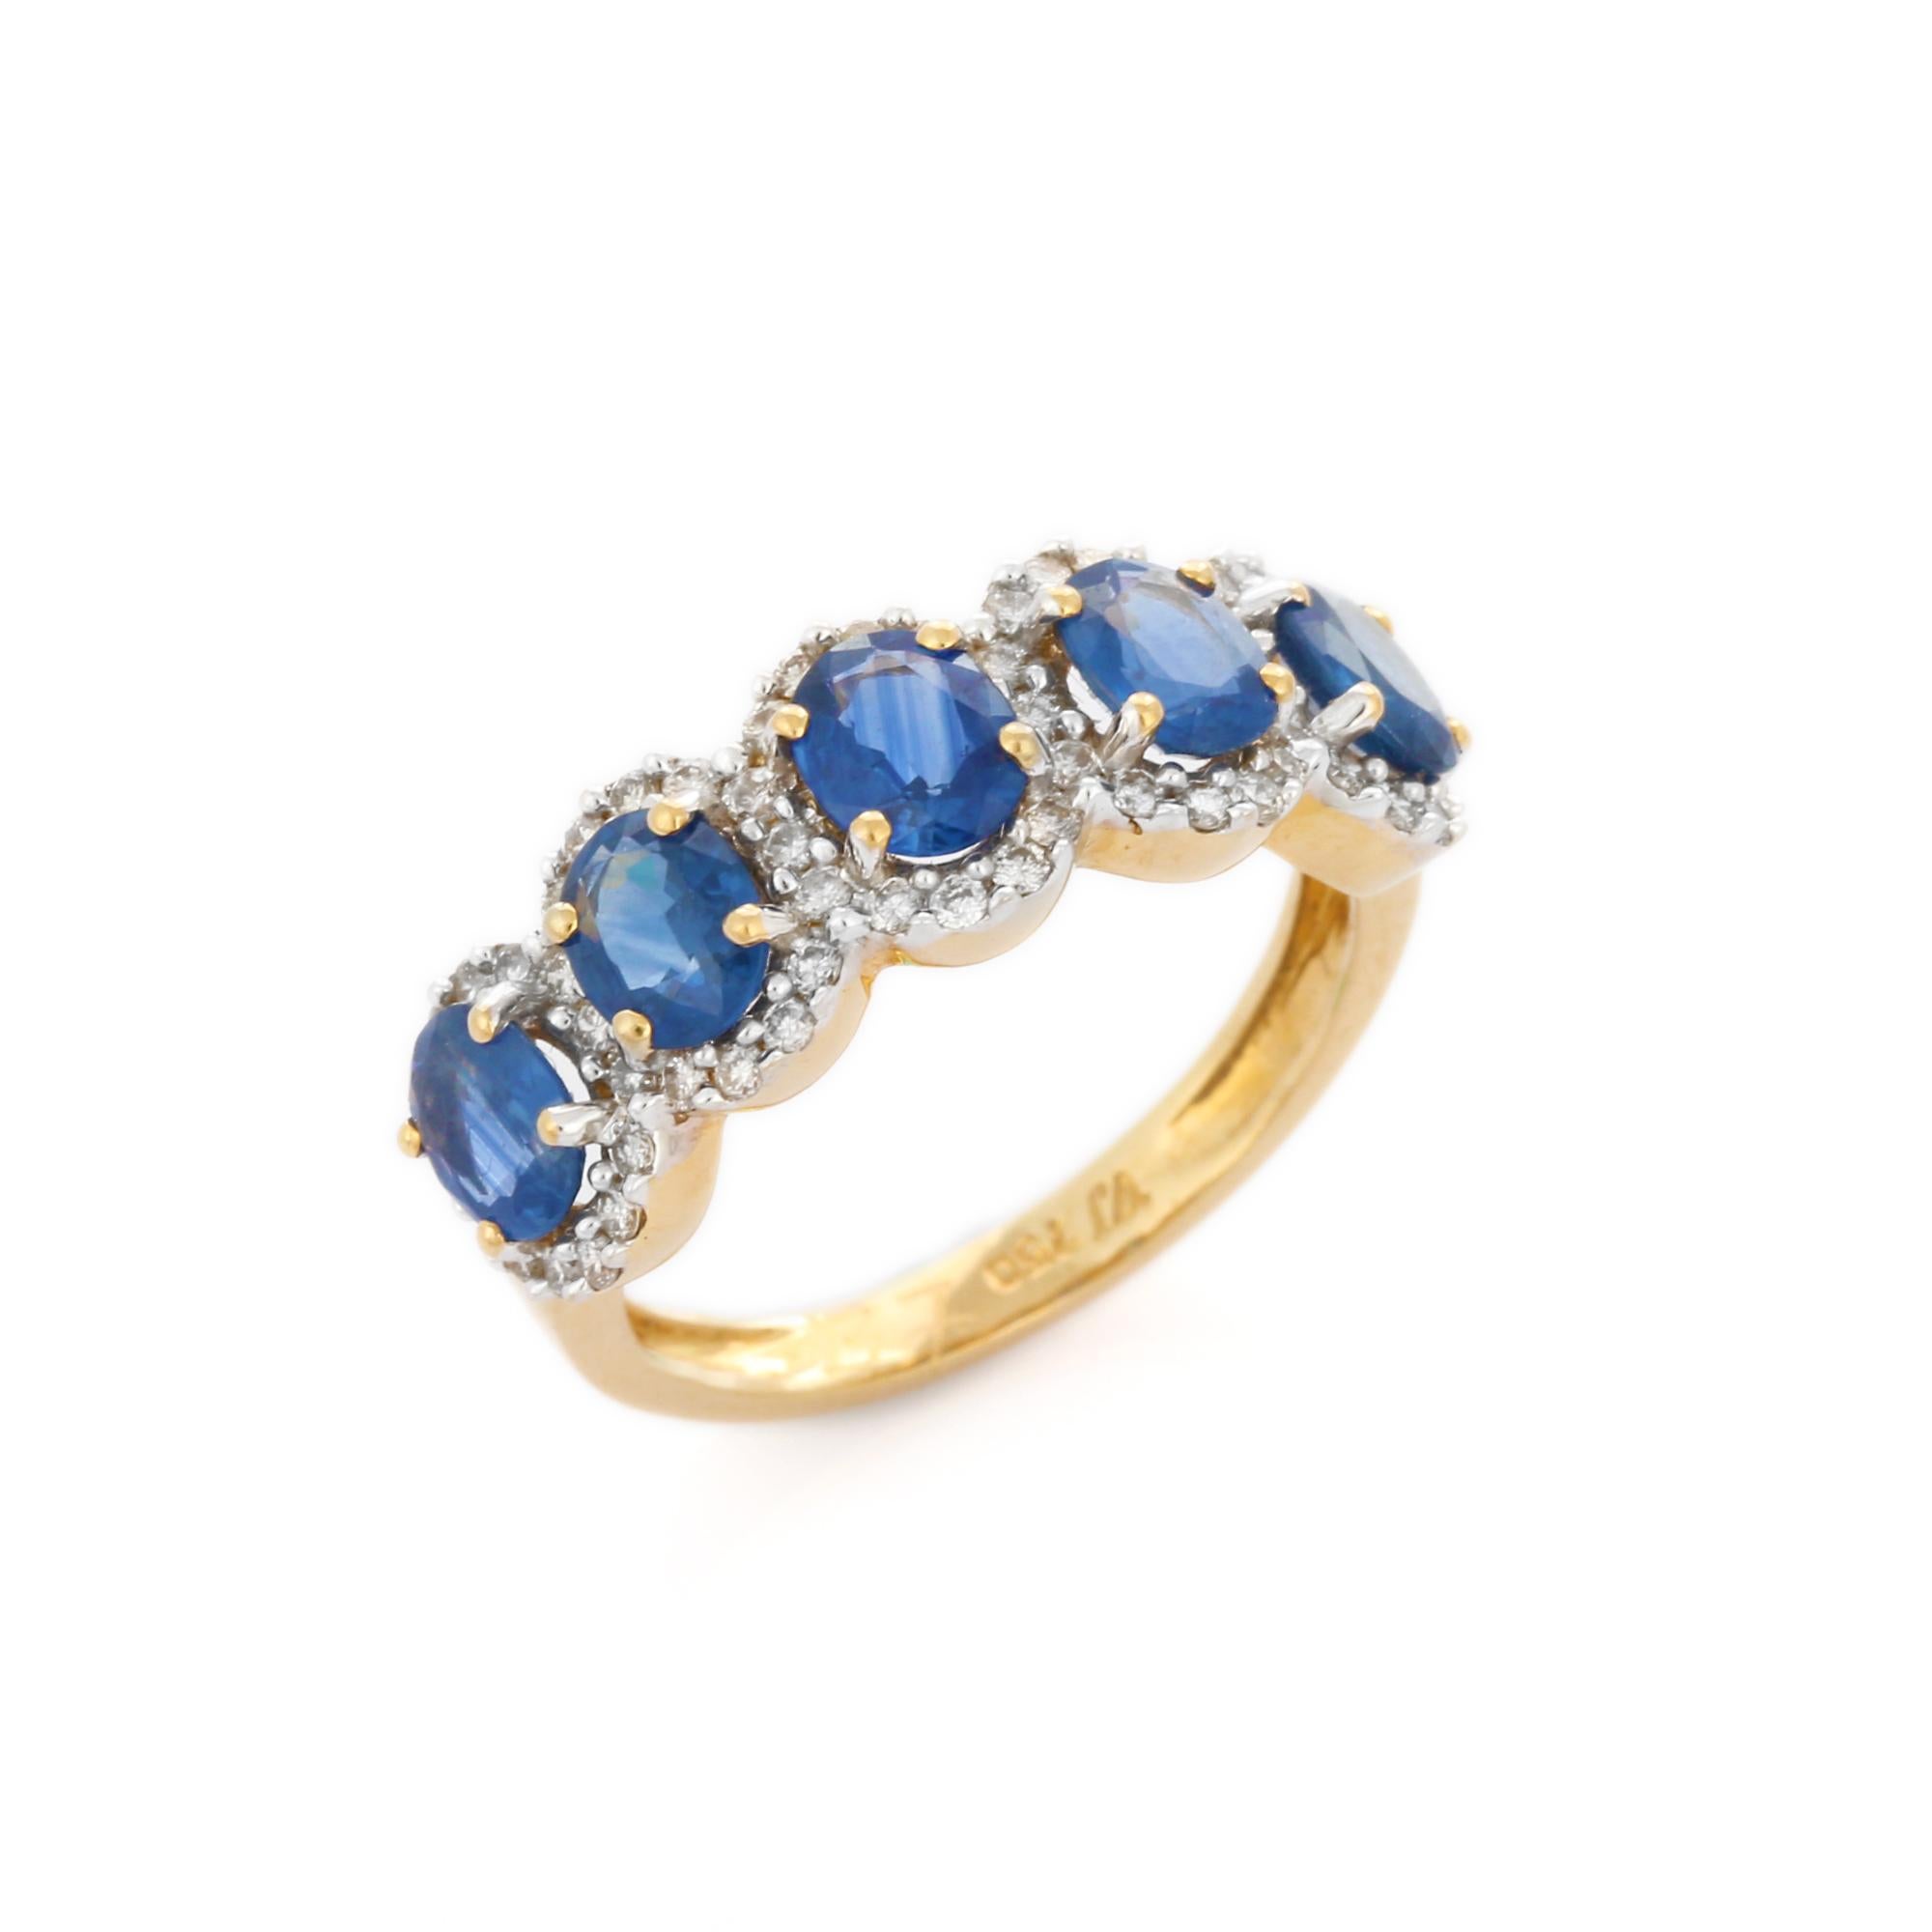 For Sale:  18K Yellow Gold Half Engagement Band with Sapphires Amidst in Diamonds 2